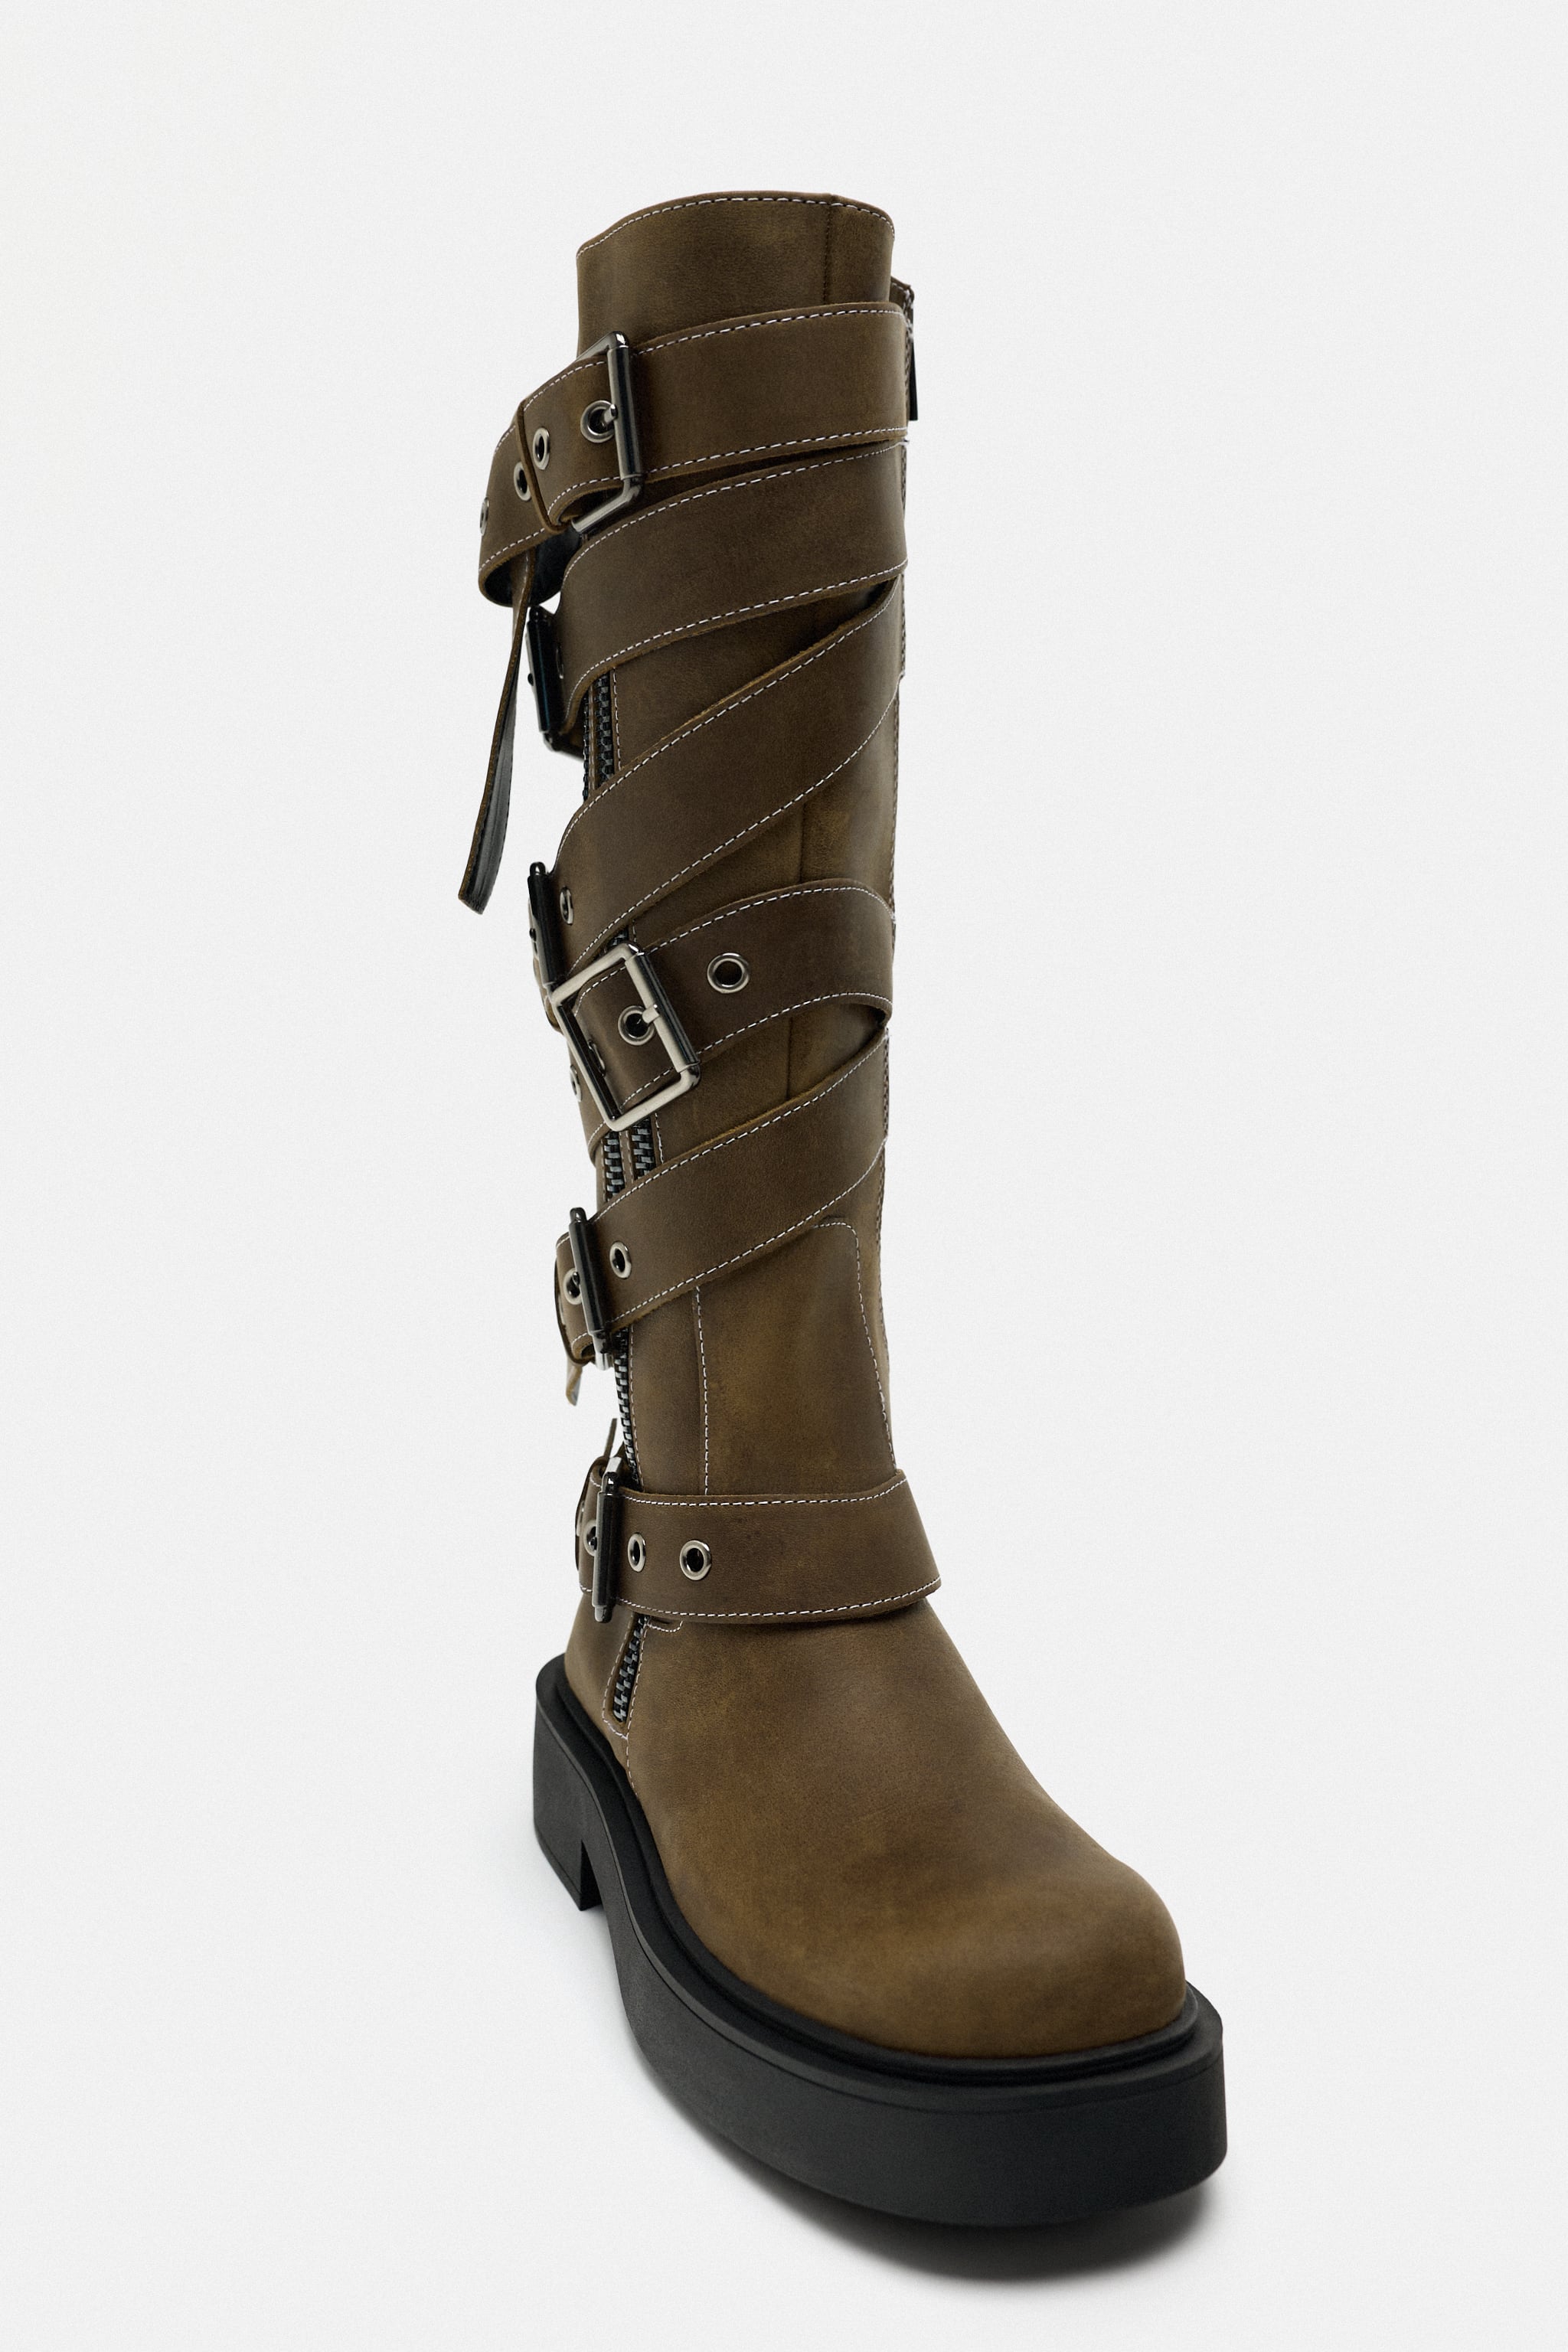 BUCKLED LEATHER KNEE HIGH BOOTS